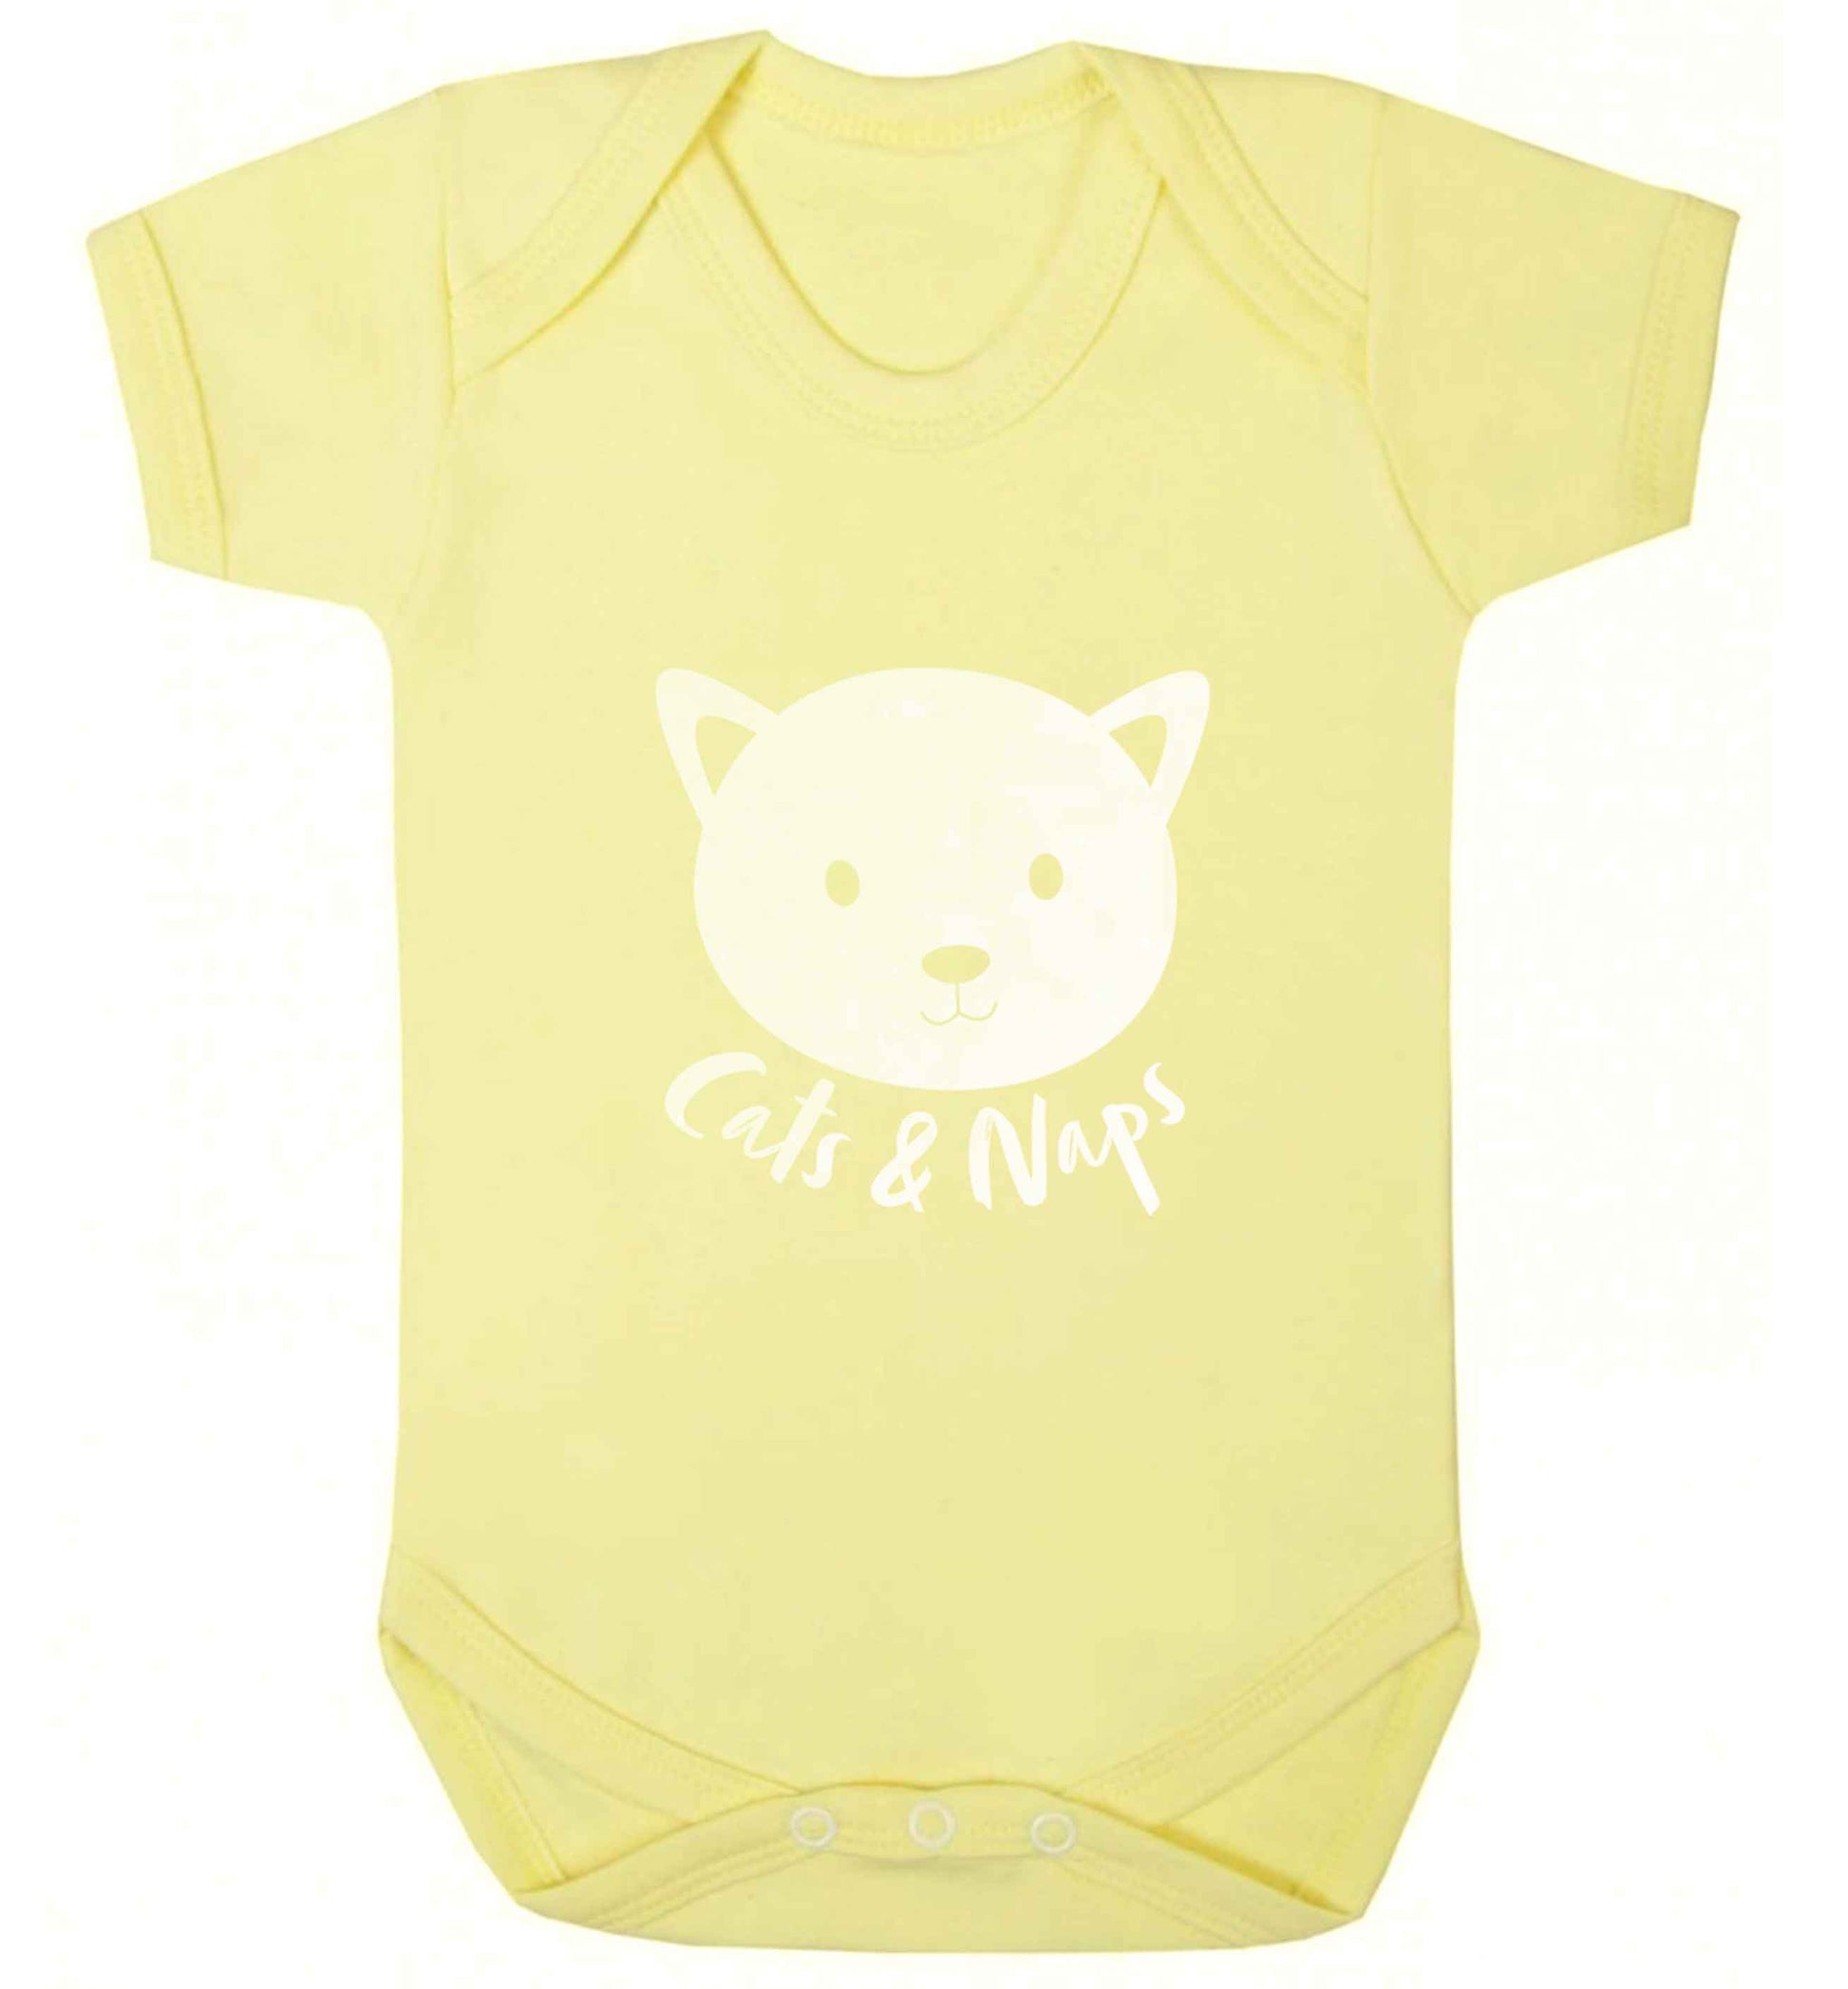 Cats and naps Kit baby vest pale yellow 18-24 months